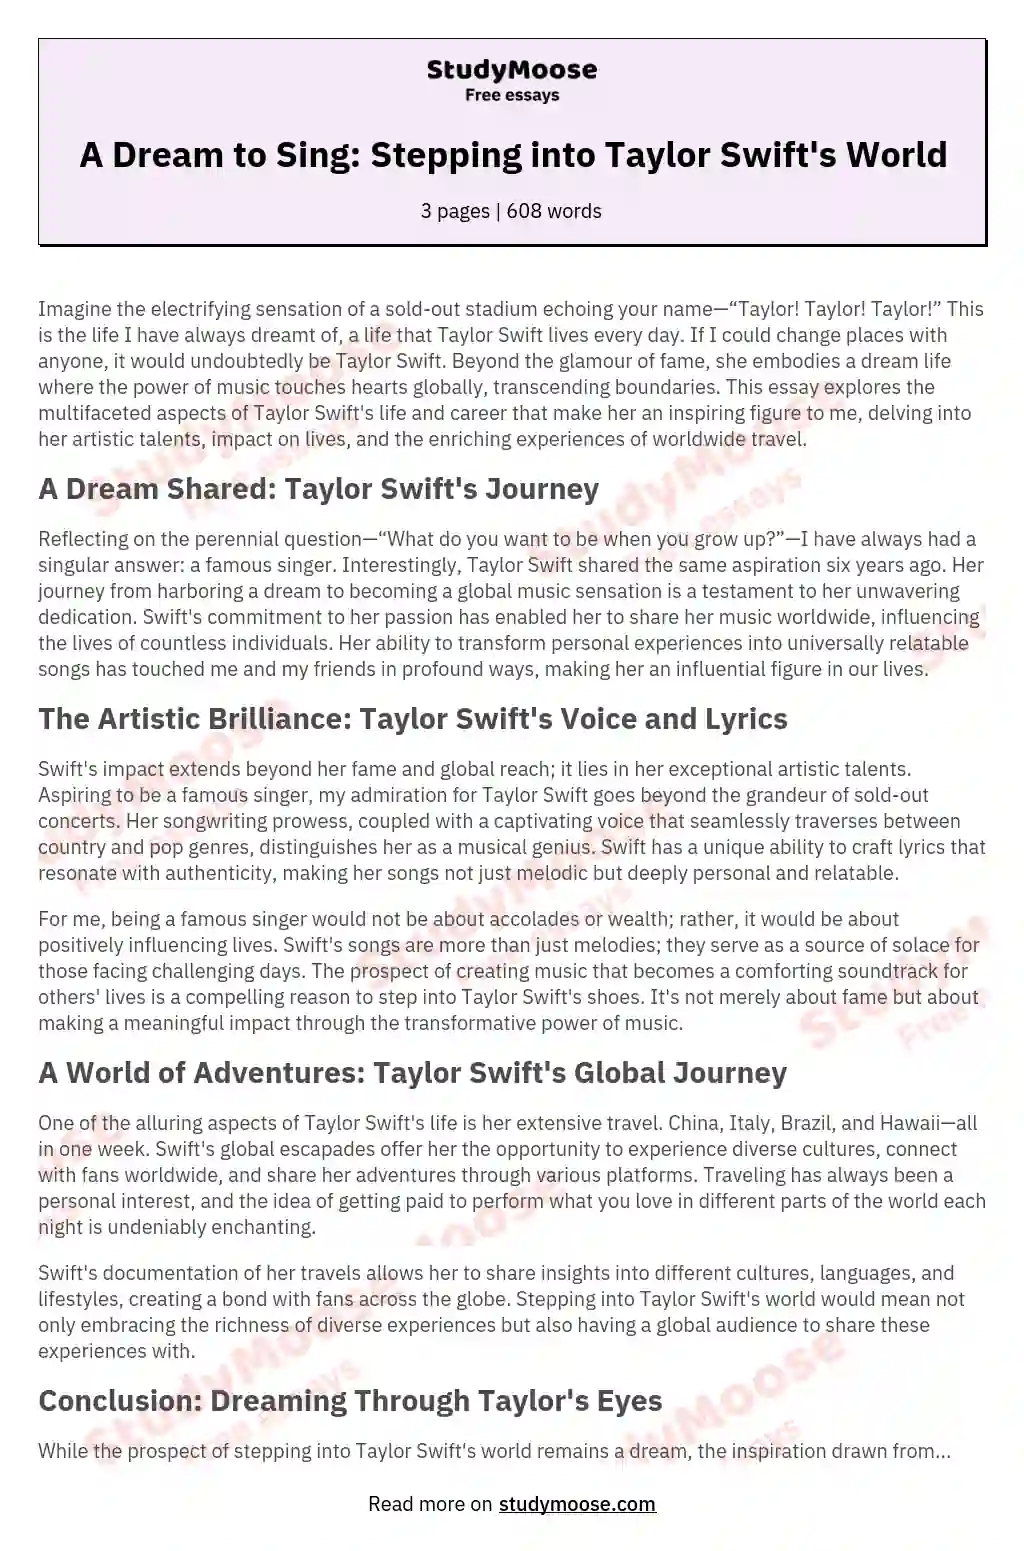 A Dream to Sing: Stepping into Taylor Swift's World essay